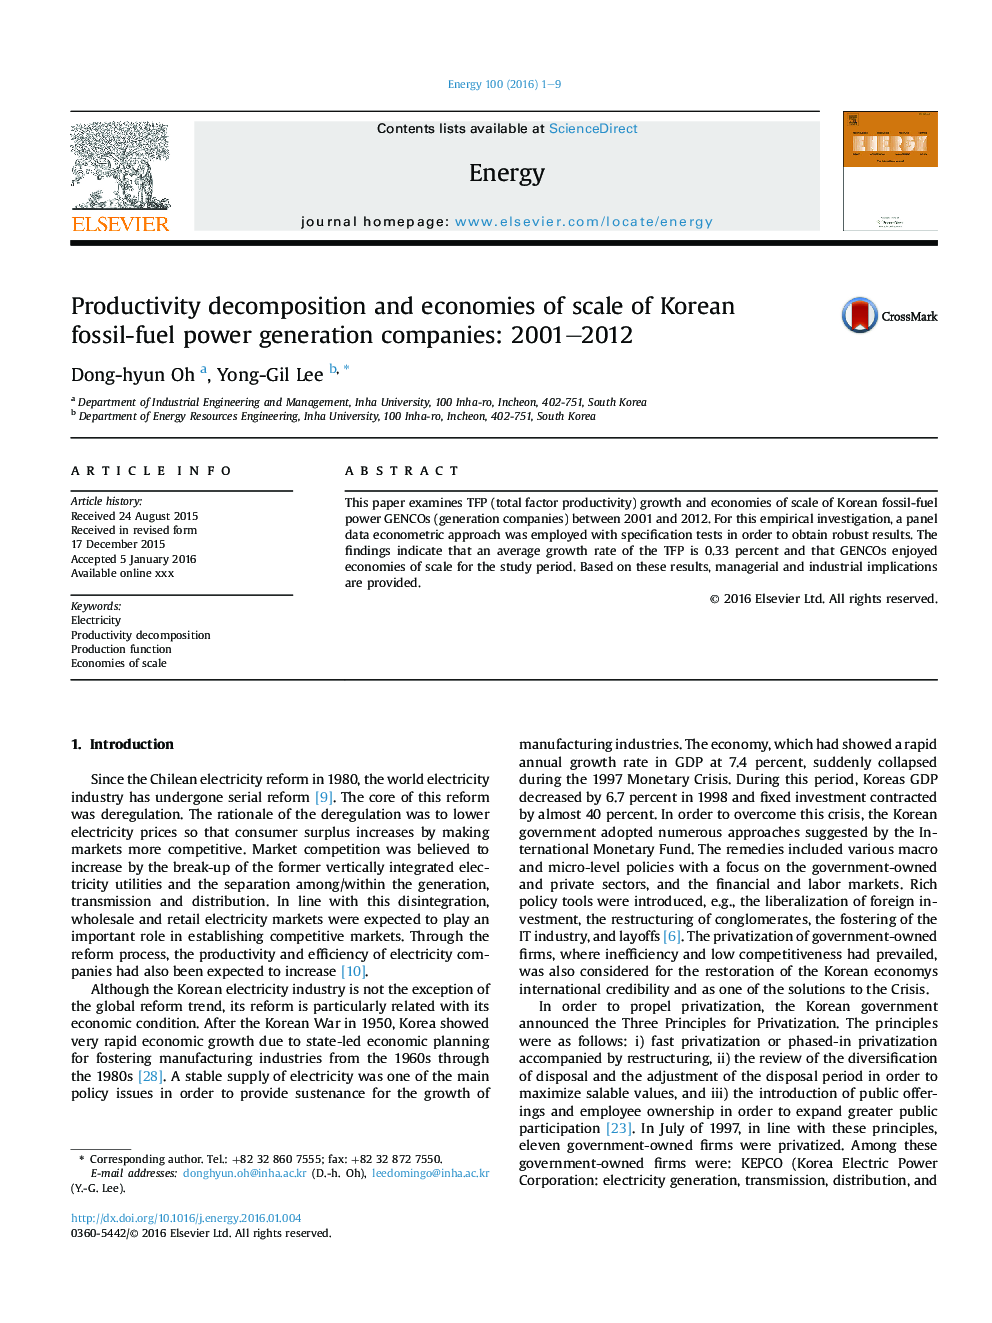 Productivity decomposition and economies of scale of Korean fossil-fuel power generation companies: 2001-2012